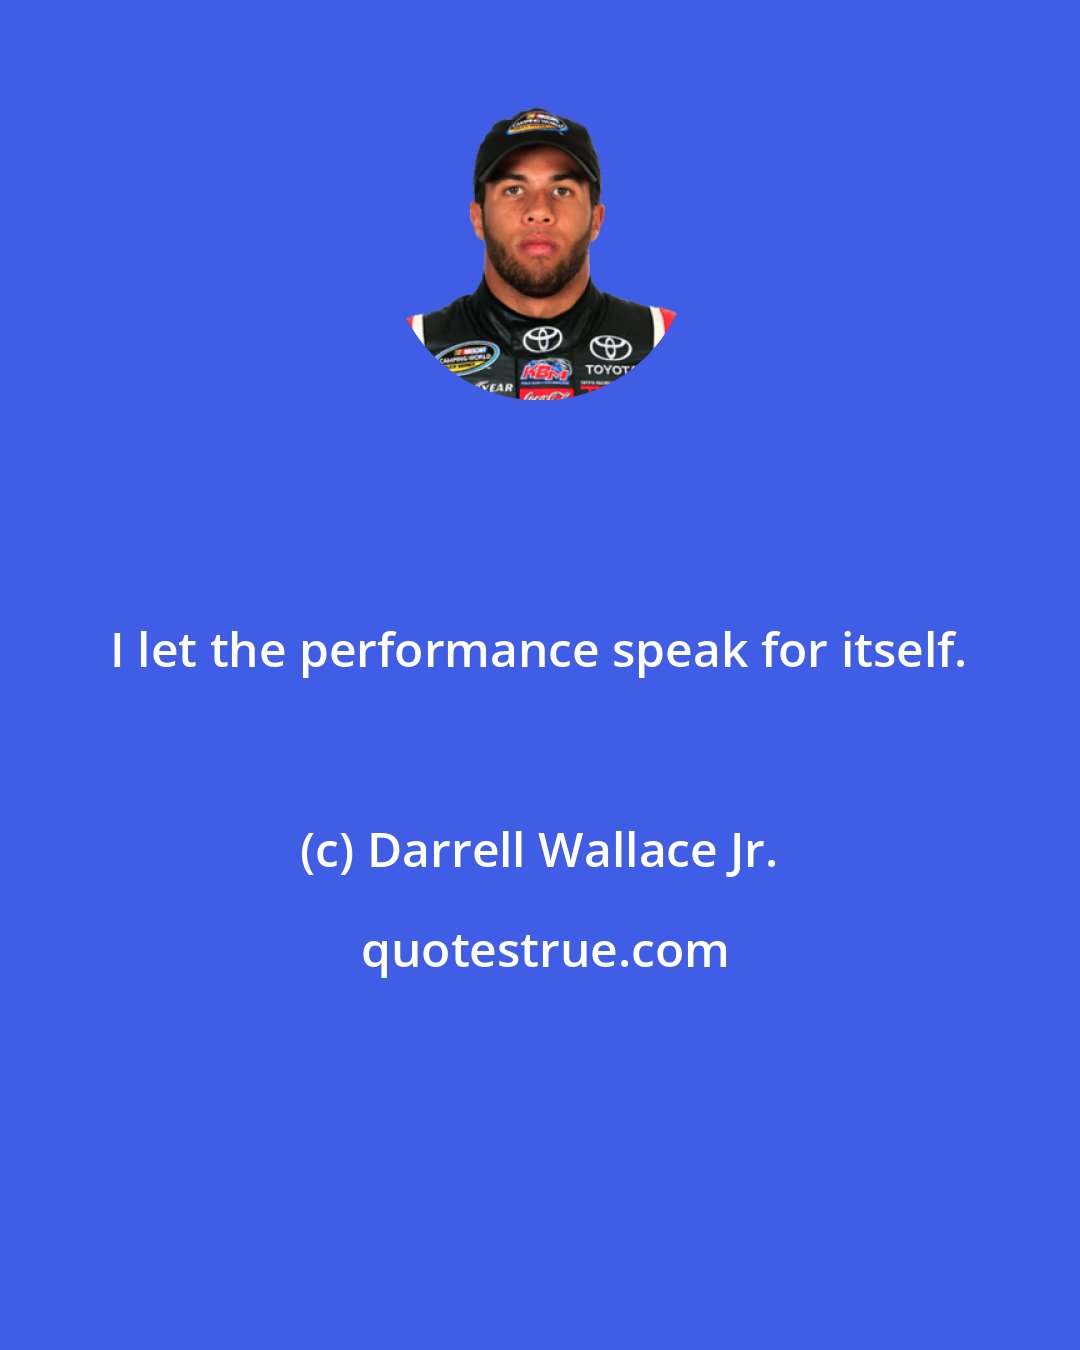 Darrell Wallace Jr.: I let the performance speak for itself.